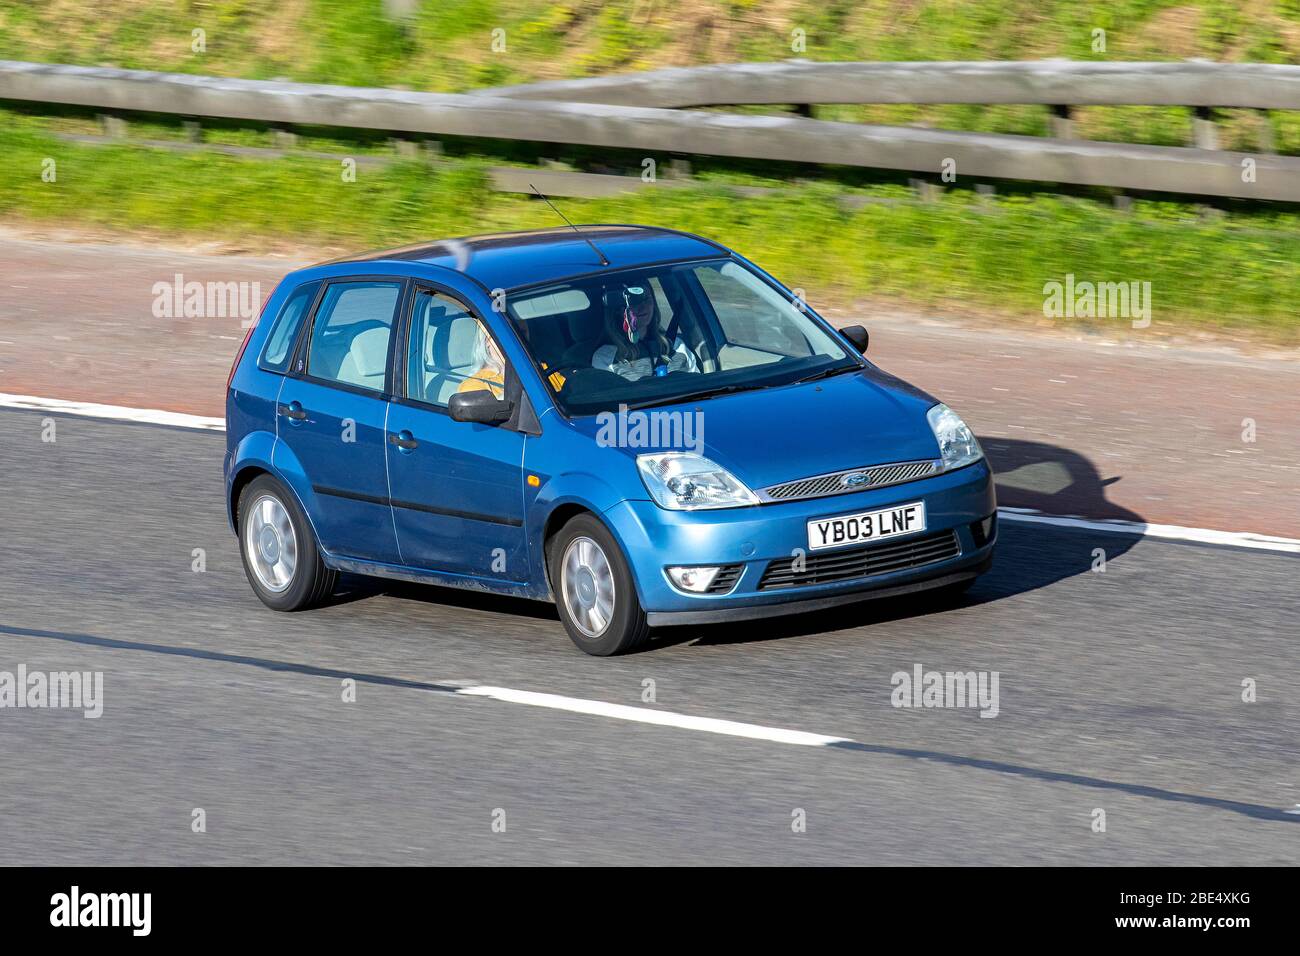 Blue Ford Fiesta High Resolution Stock Photography and Images - Alamy